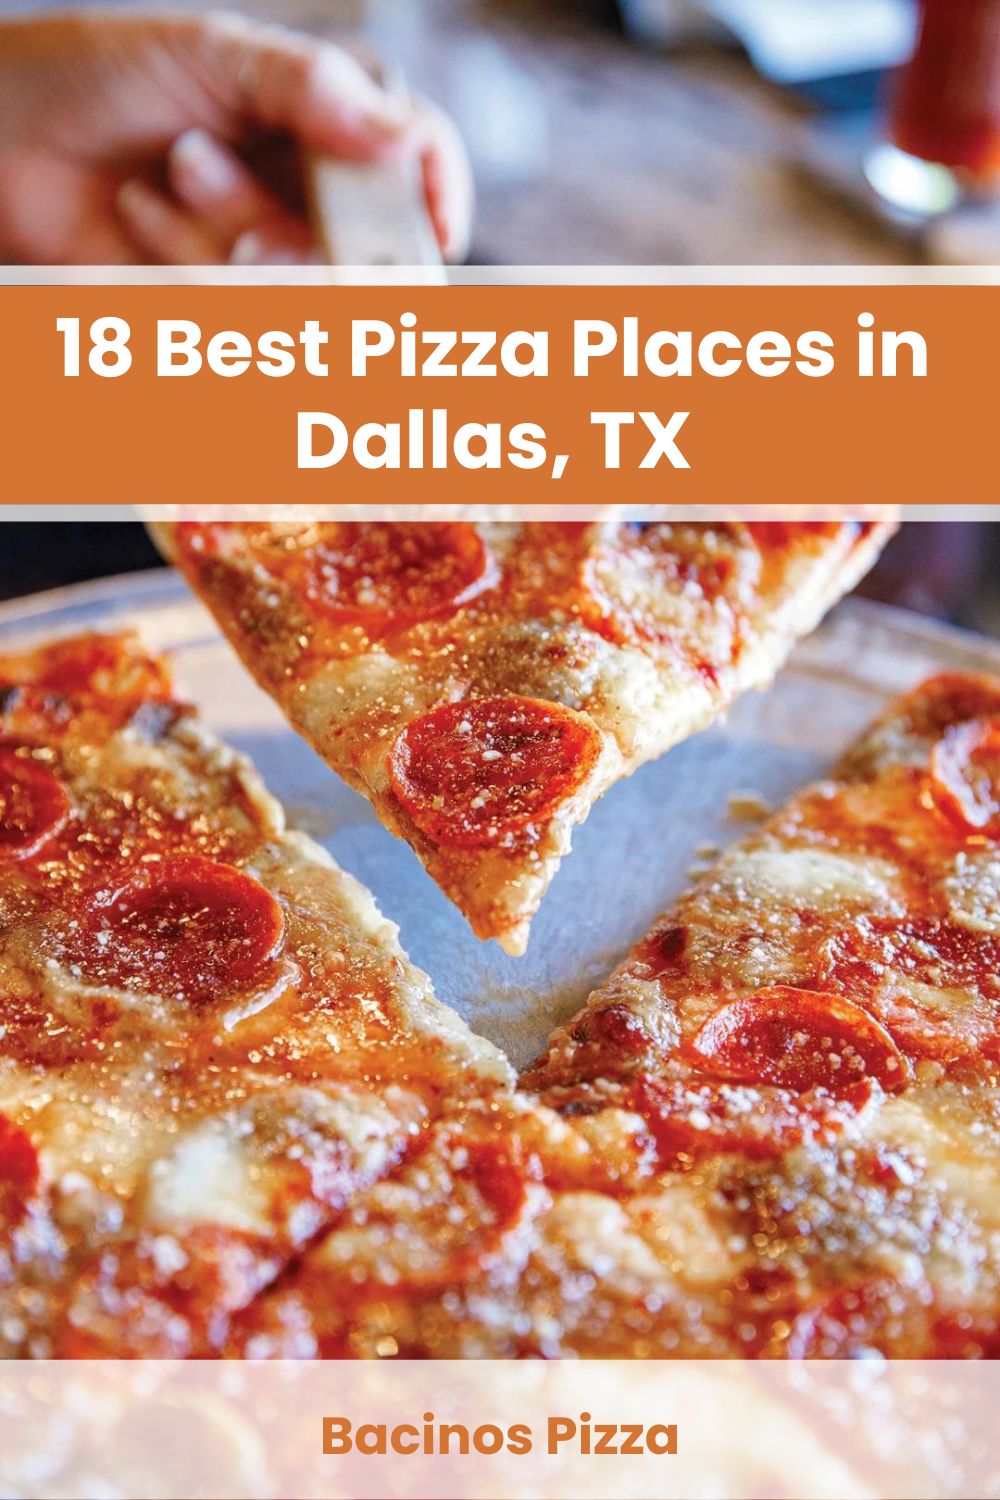 Best Pizza Places in Dallas